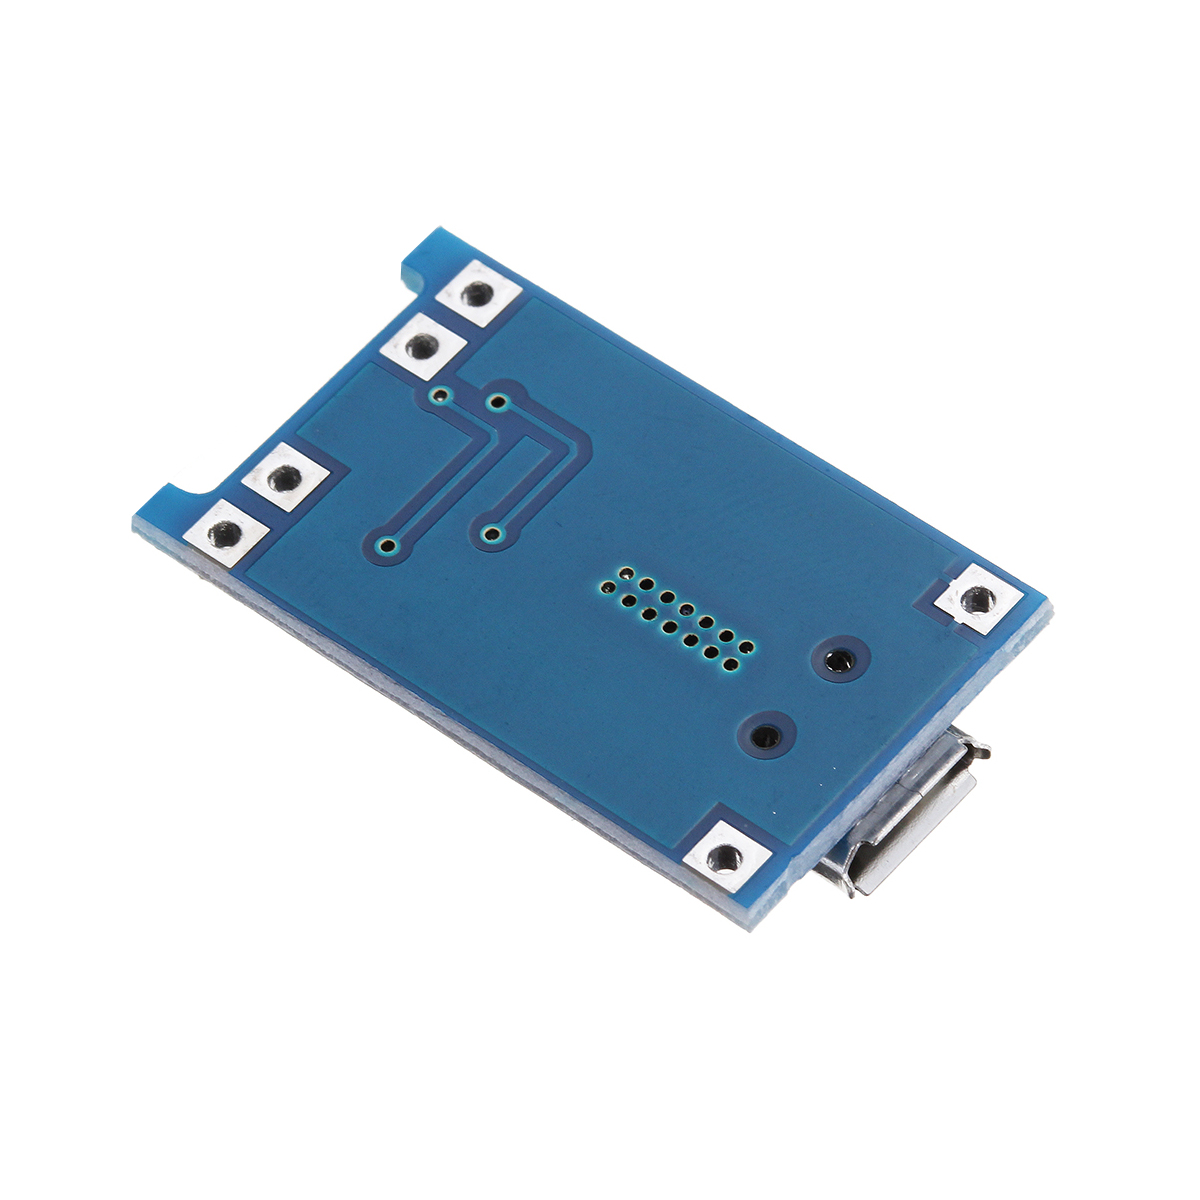 20Pcs-TP4056-Micro-USB-5V-1A-Lithium-Battery-Charging-Protection-Board-TE585-Lipo-Charger-Module-1734585